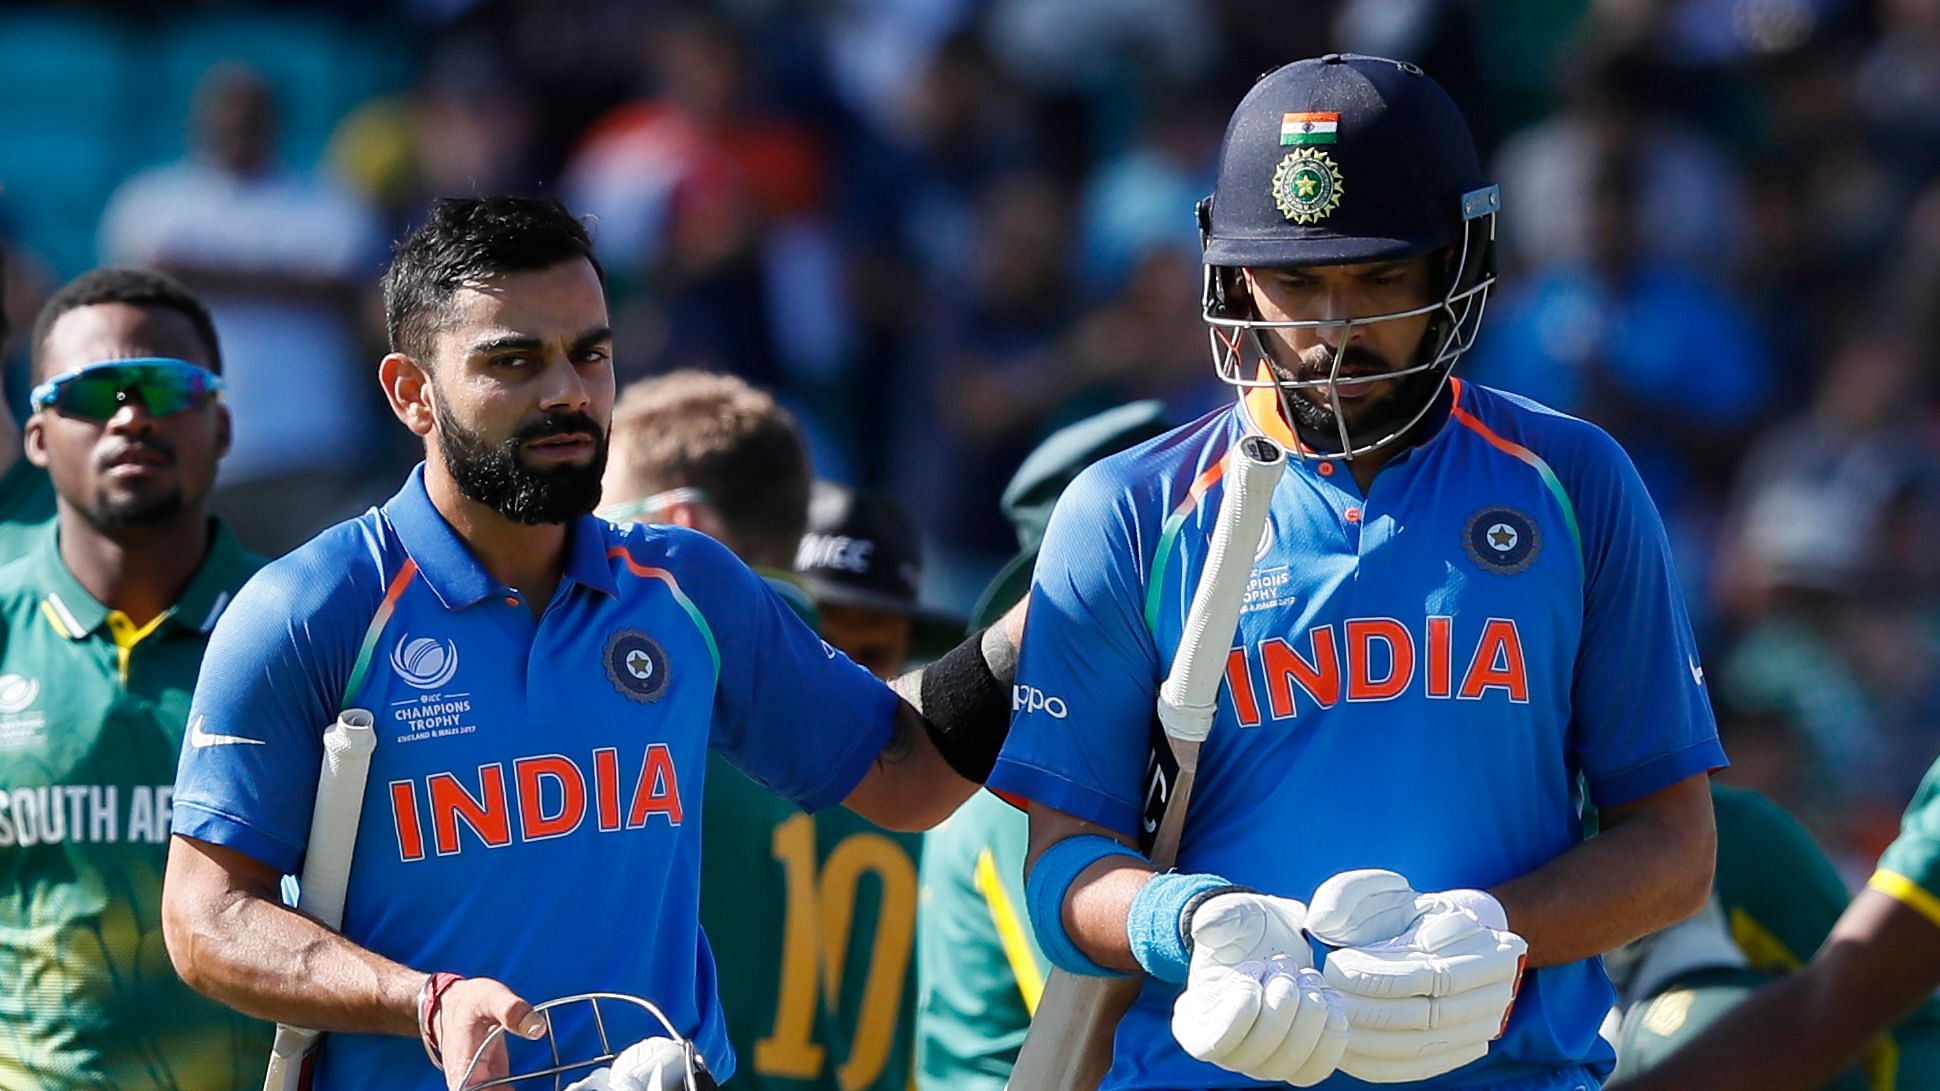 Yuvraj Singh hints that Virat didn’t inform him before dropping him from the Indian team in 2017.